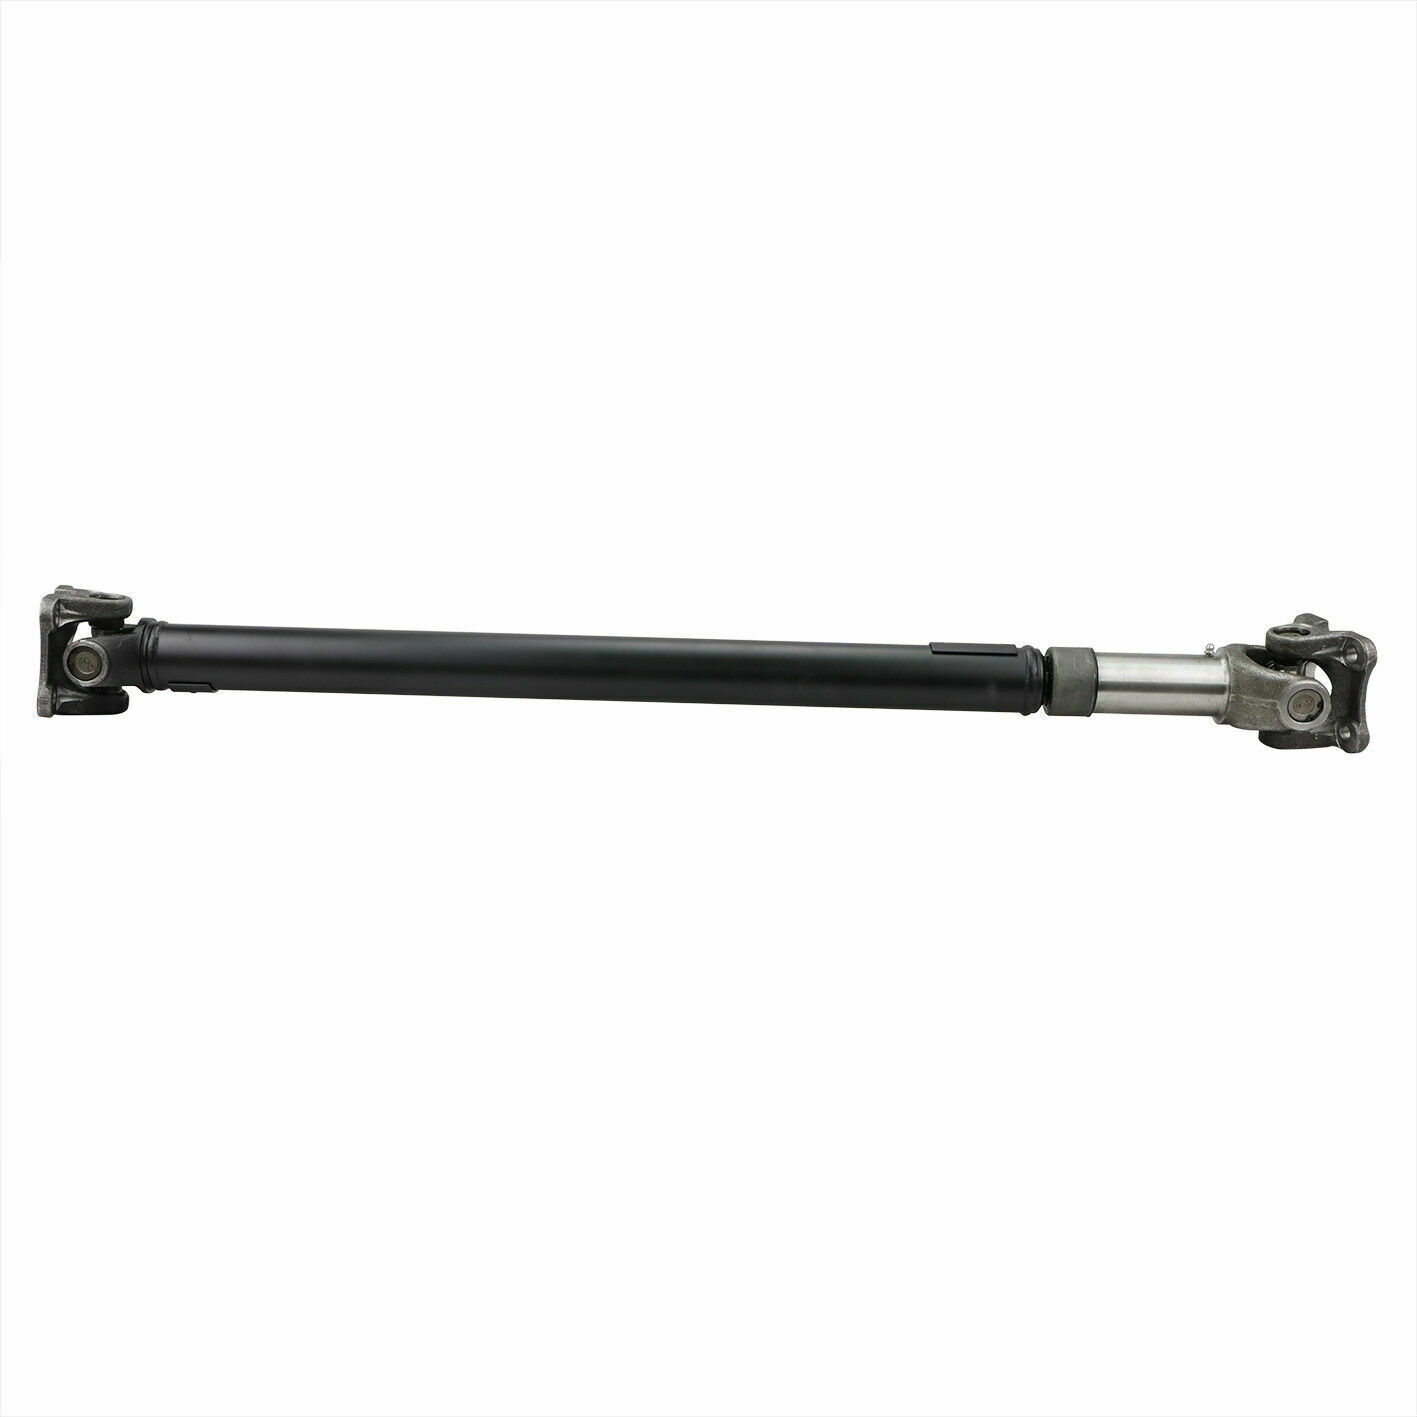 39 11/16" REAR Prop Drive Shaft for 1989 - 1990 Ford Bronco II RWD w/ M 1989 Ford Bronco Ii Rear Drive Shaft